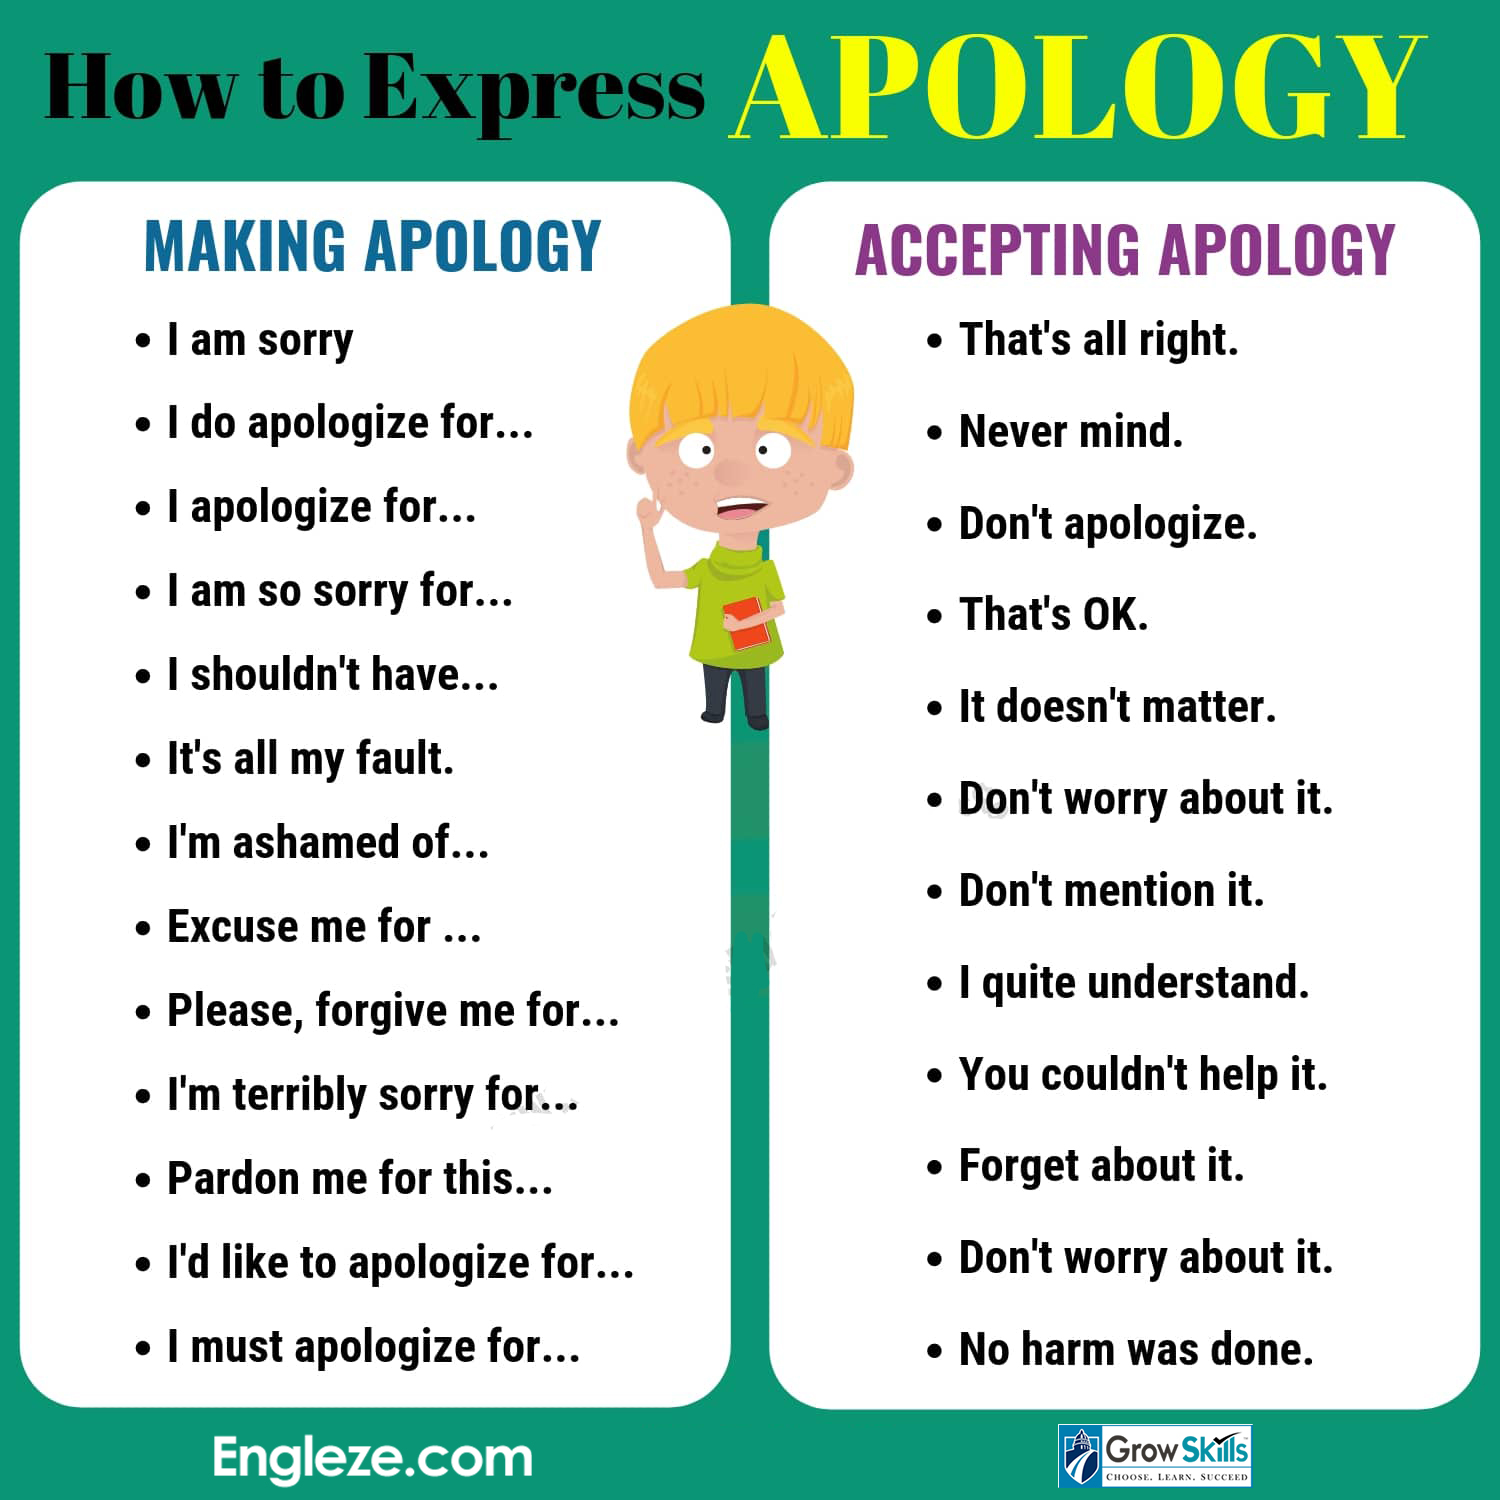 How to accept